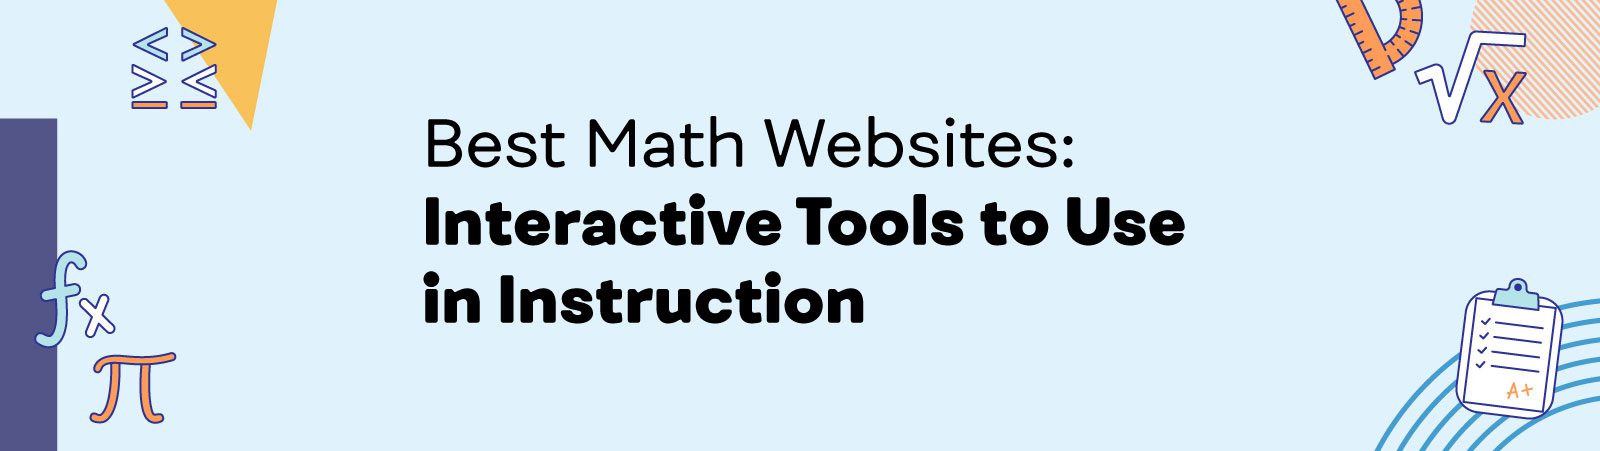 75+ Awesome Websites for Teaching and Learning Math